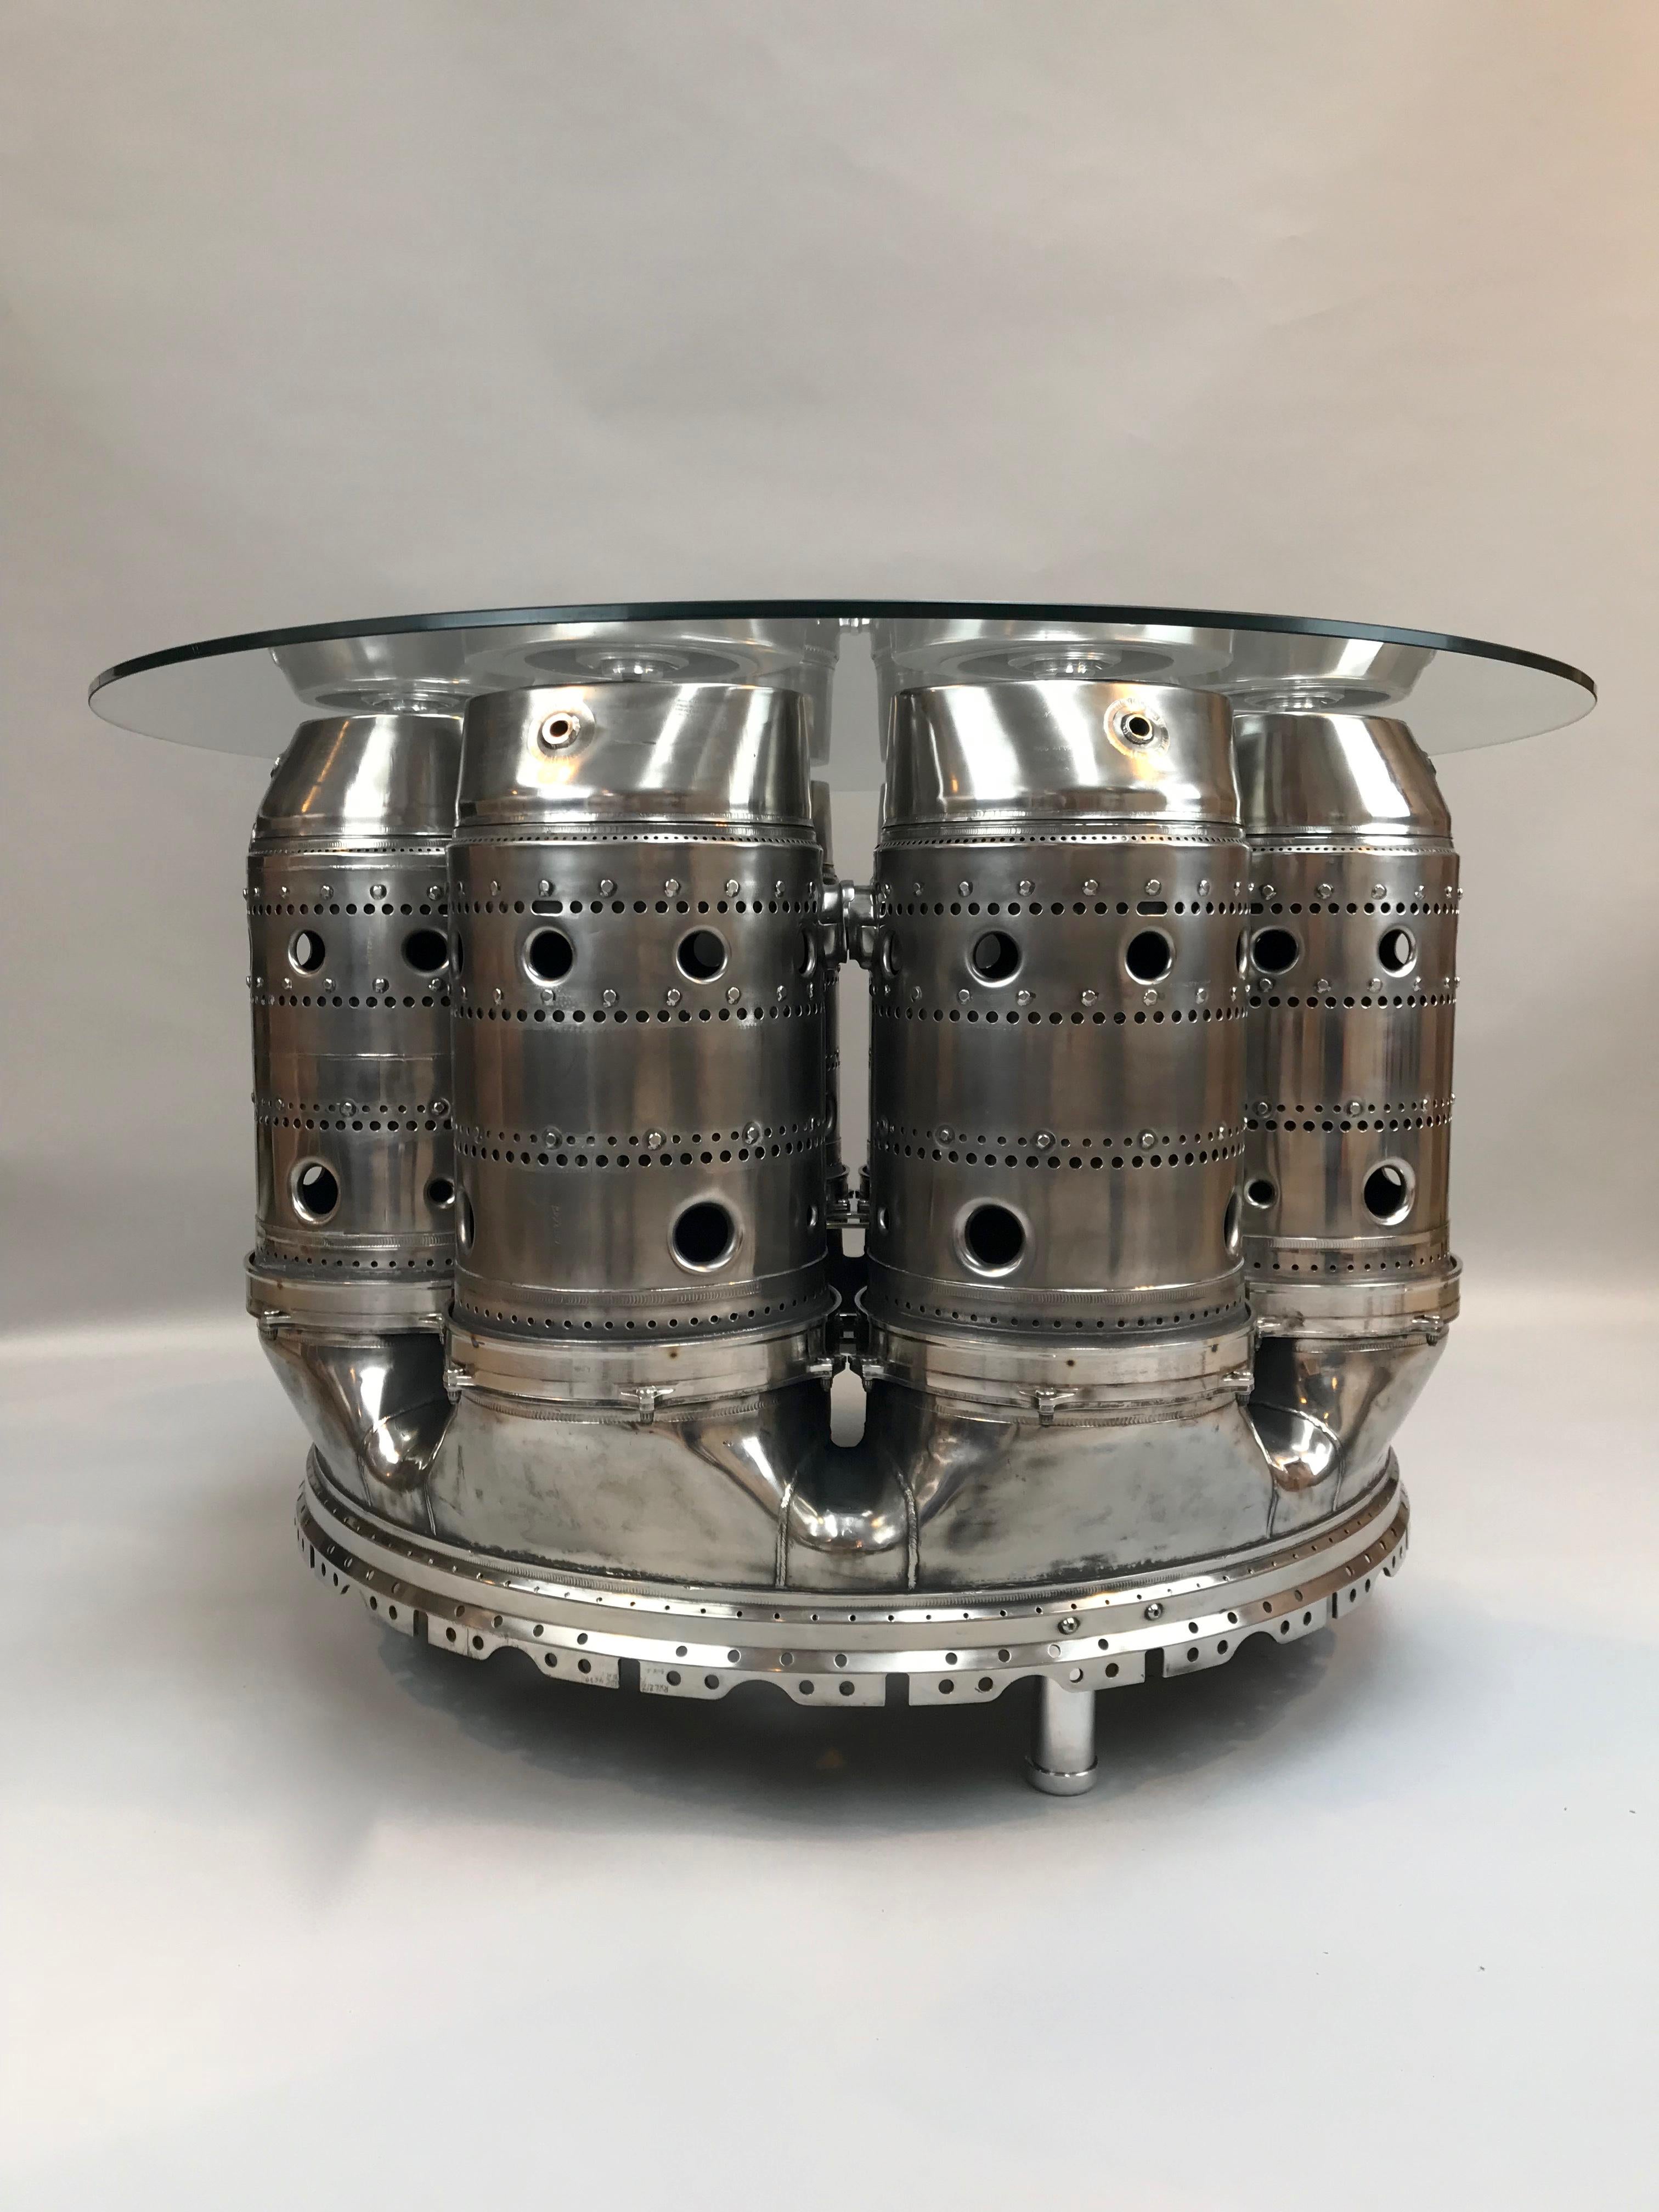 Own a piece of British Marine History with this HMS Bristol Olympus TM1A turbine engine table!
A very unique table created with the burner can section from a gas turbine used on Type 82 Destroyer (HMS Bristol).

Comfortable seating from 4-8